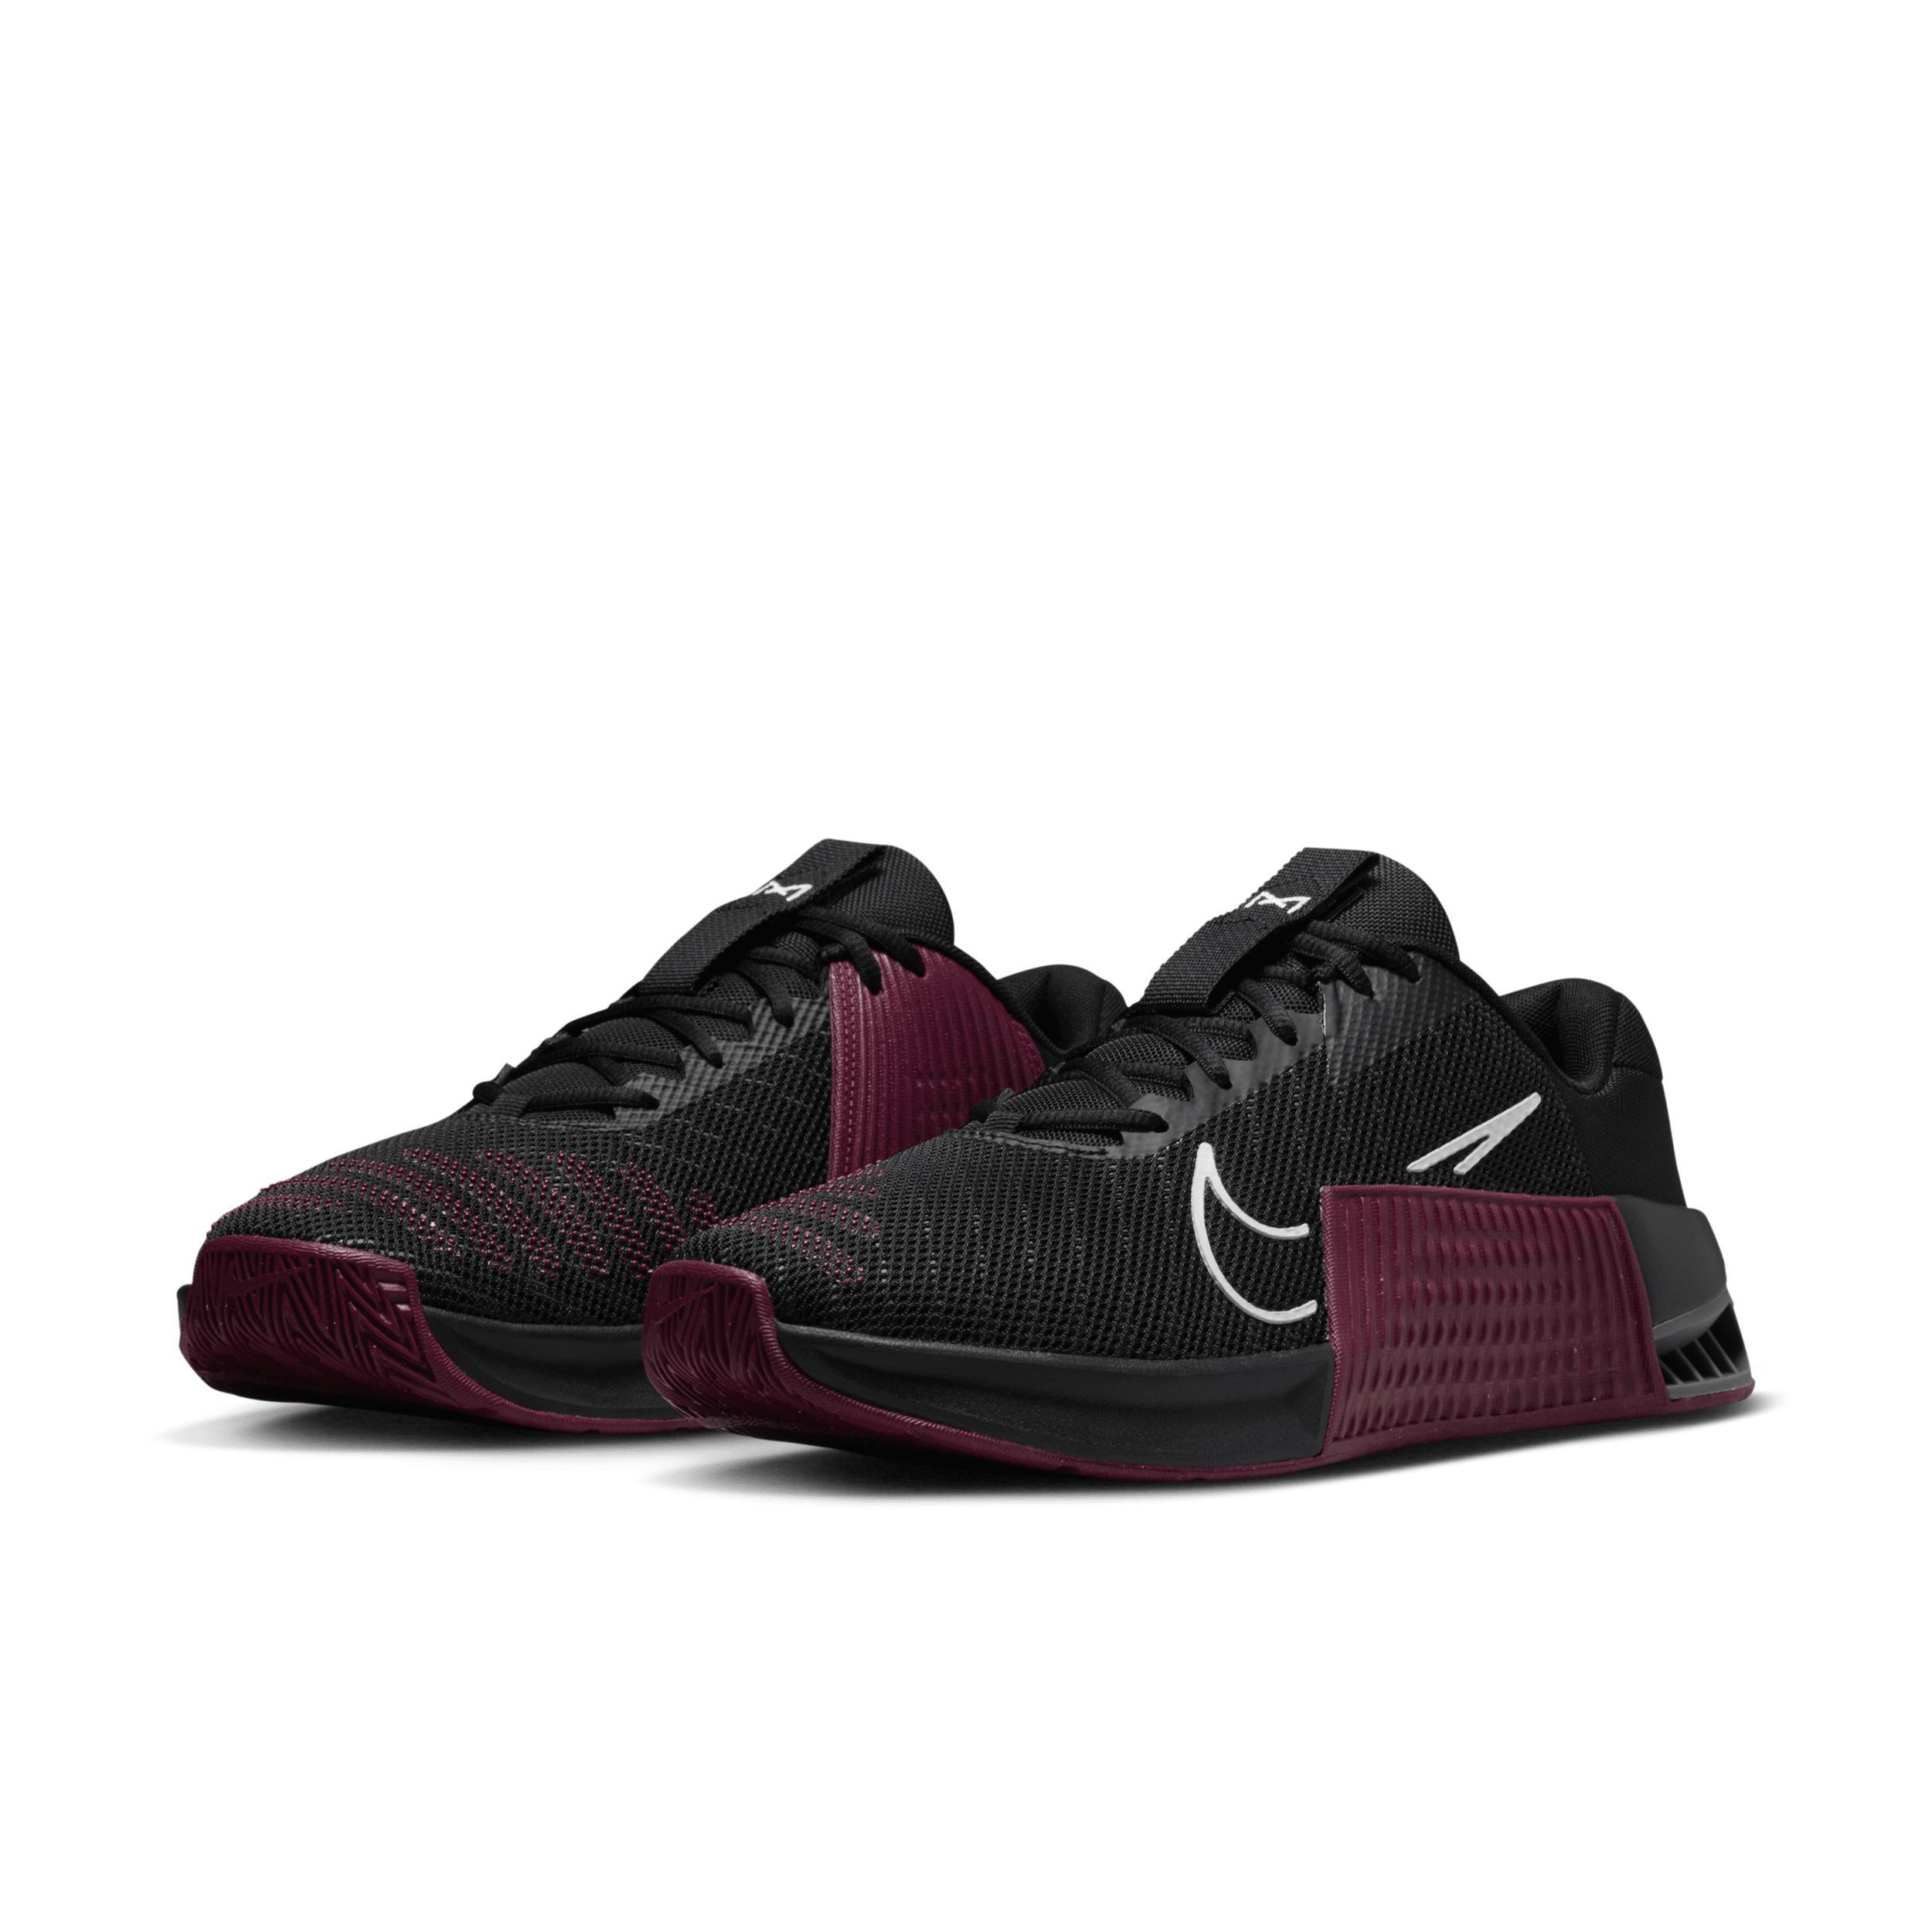 Nike Men's Metcon 9 (Team) Workout Shoes Product Image